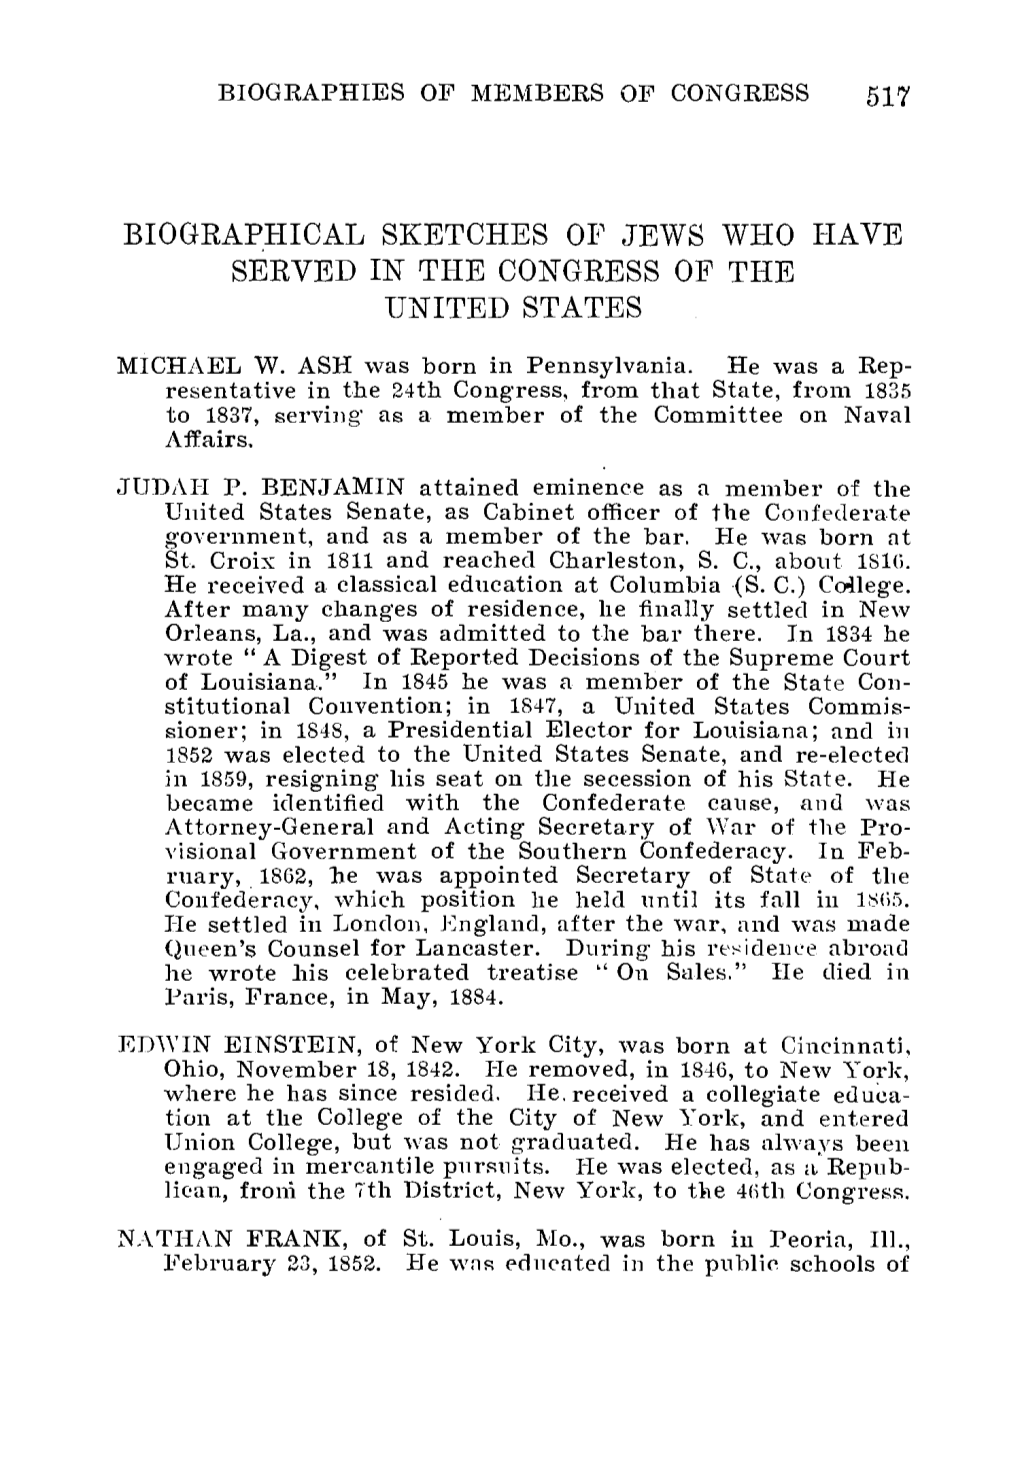 Biographical Sketches of Jews Who Have Served in the Congress of the United States Michael W